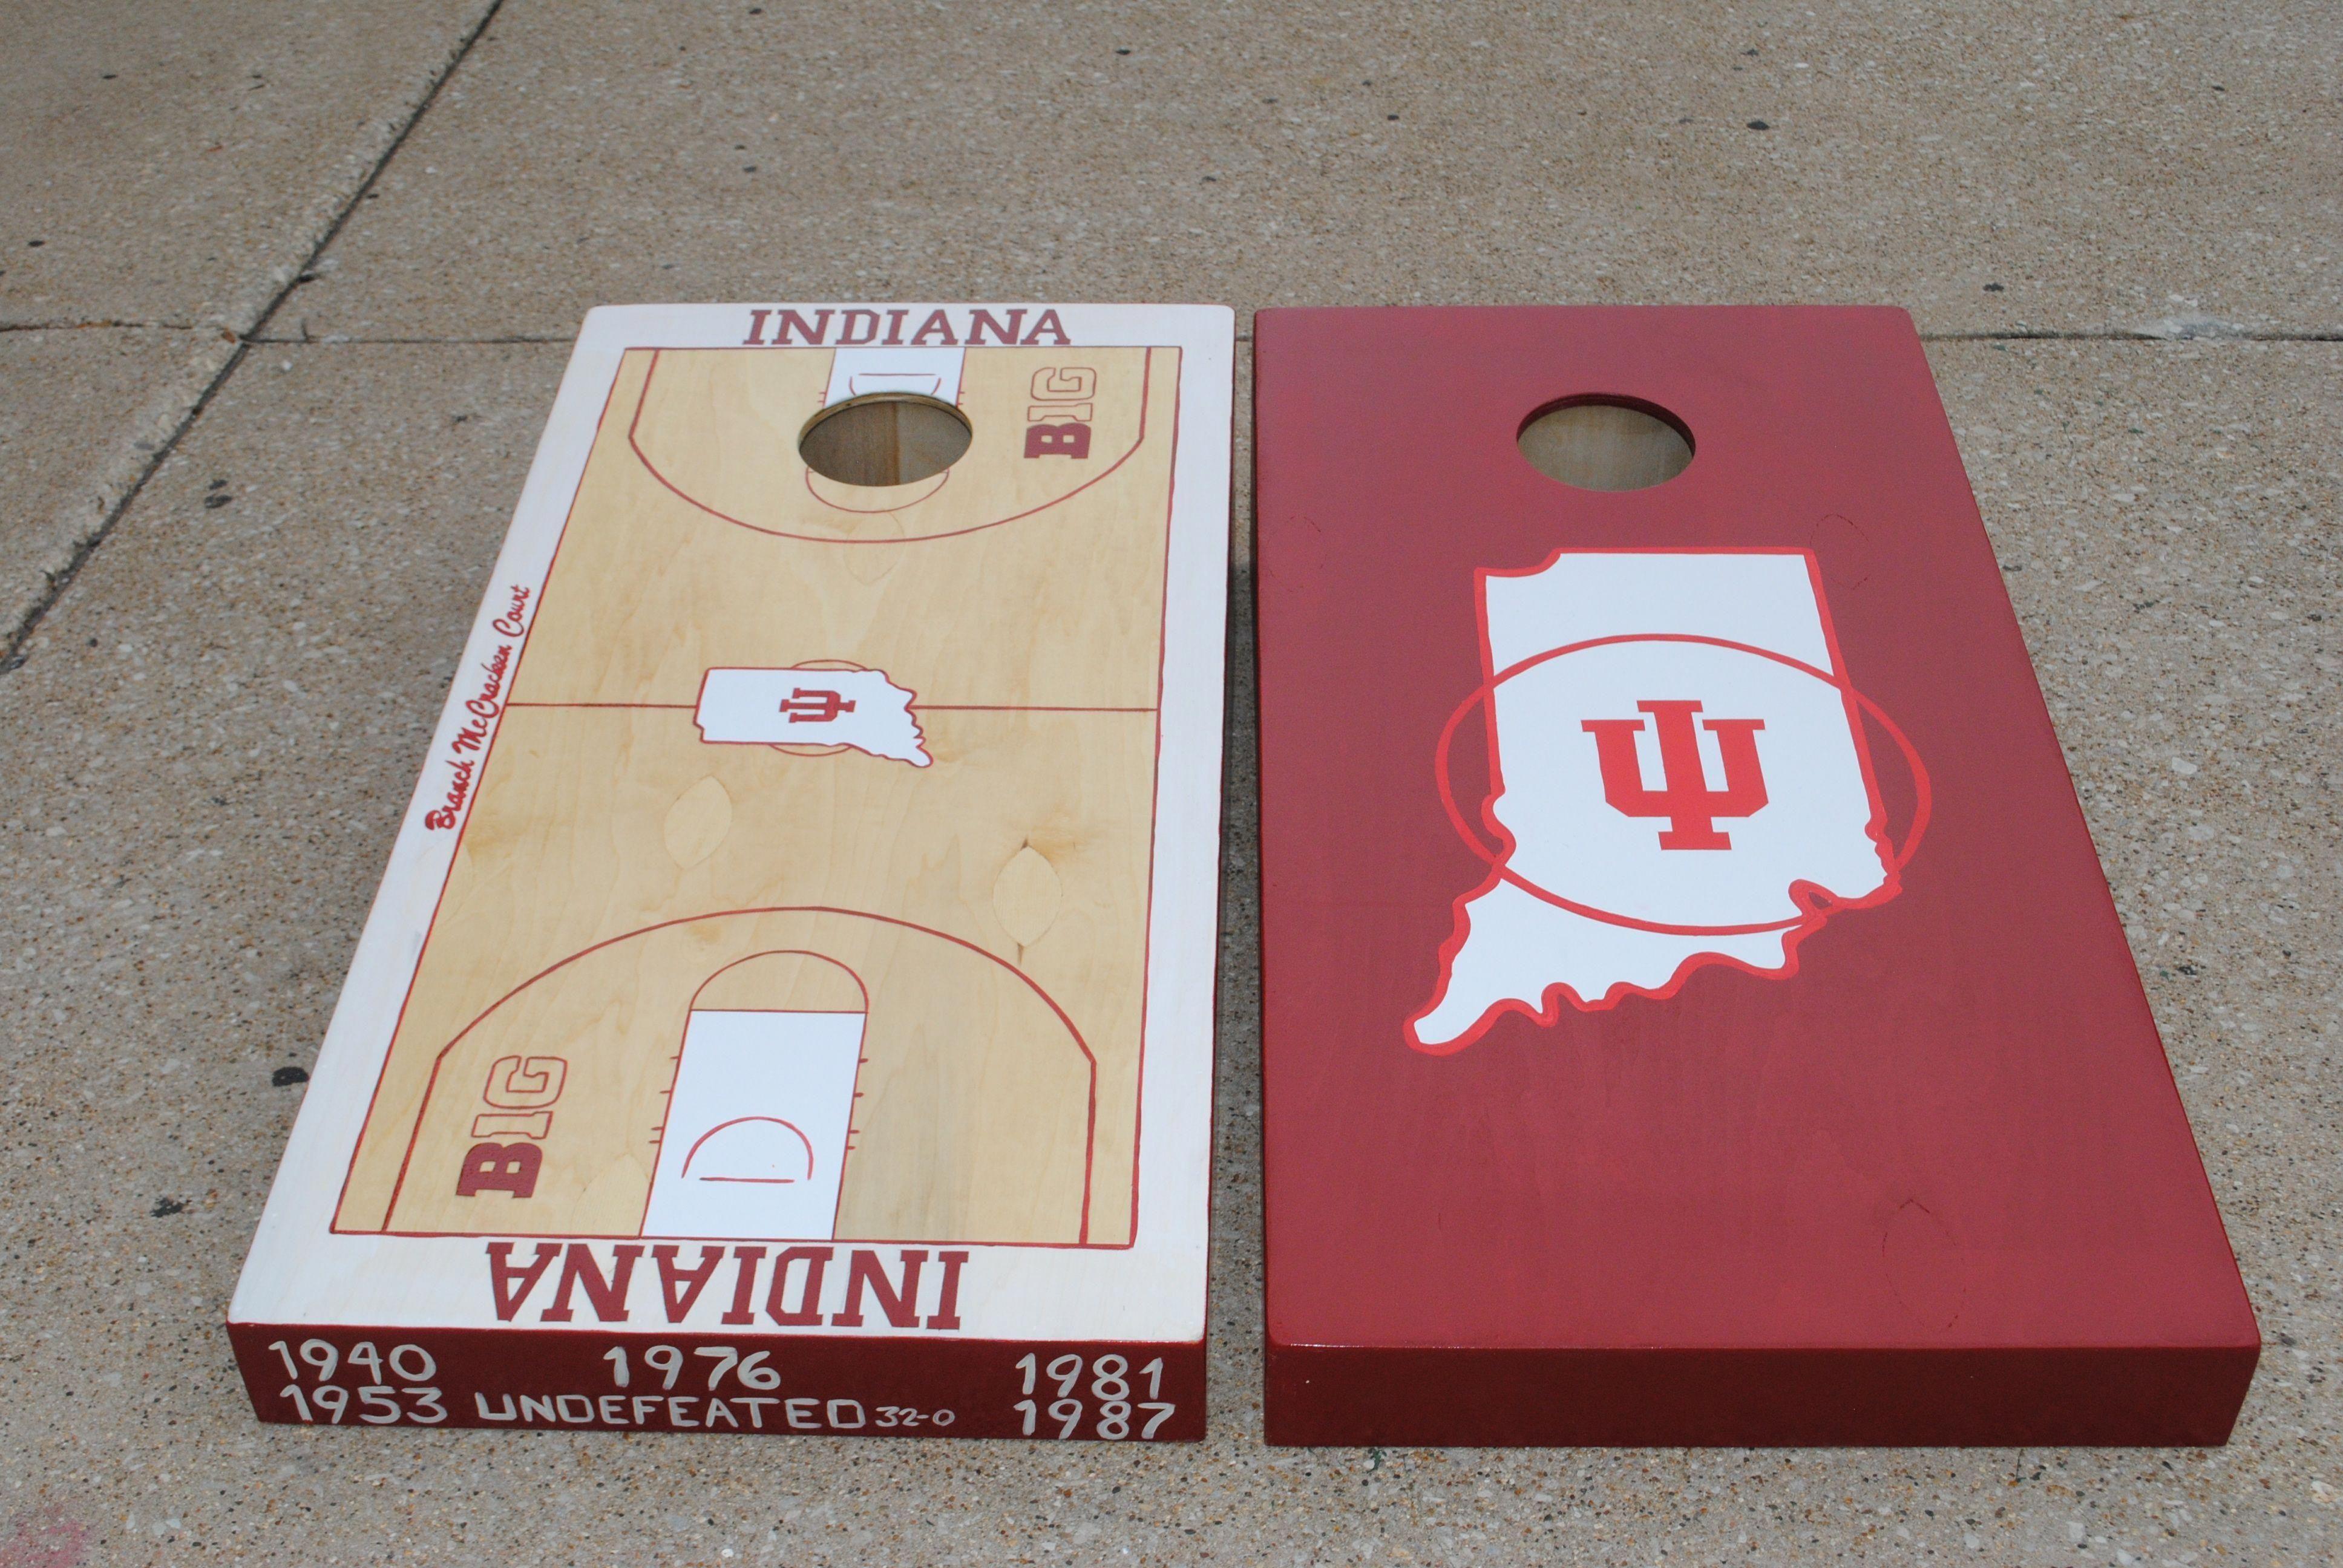 Court State of Indiana Logo - Indiana Hoosier basketball court/ IU state logo design. On the very ...